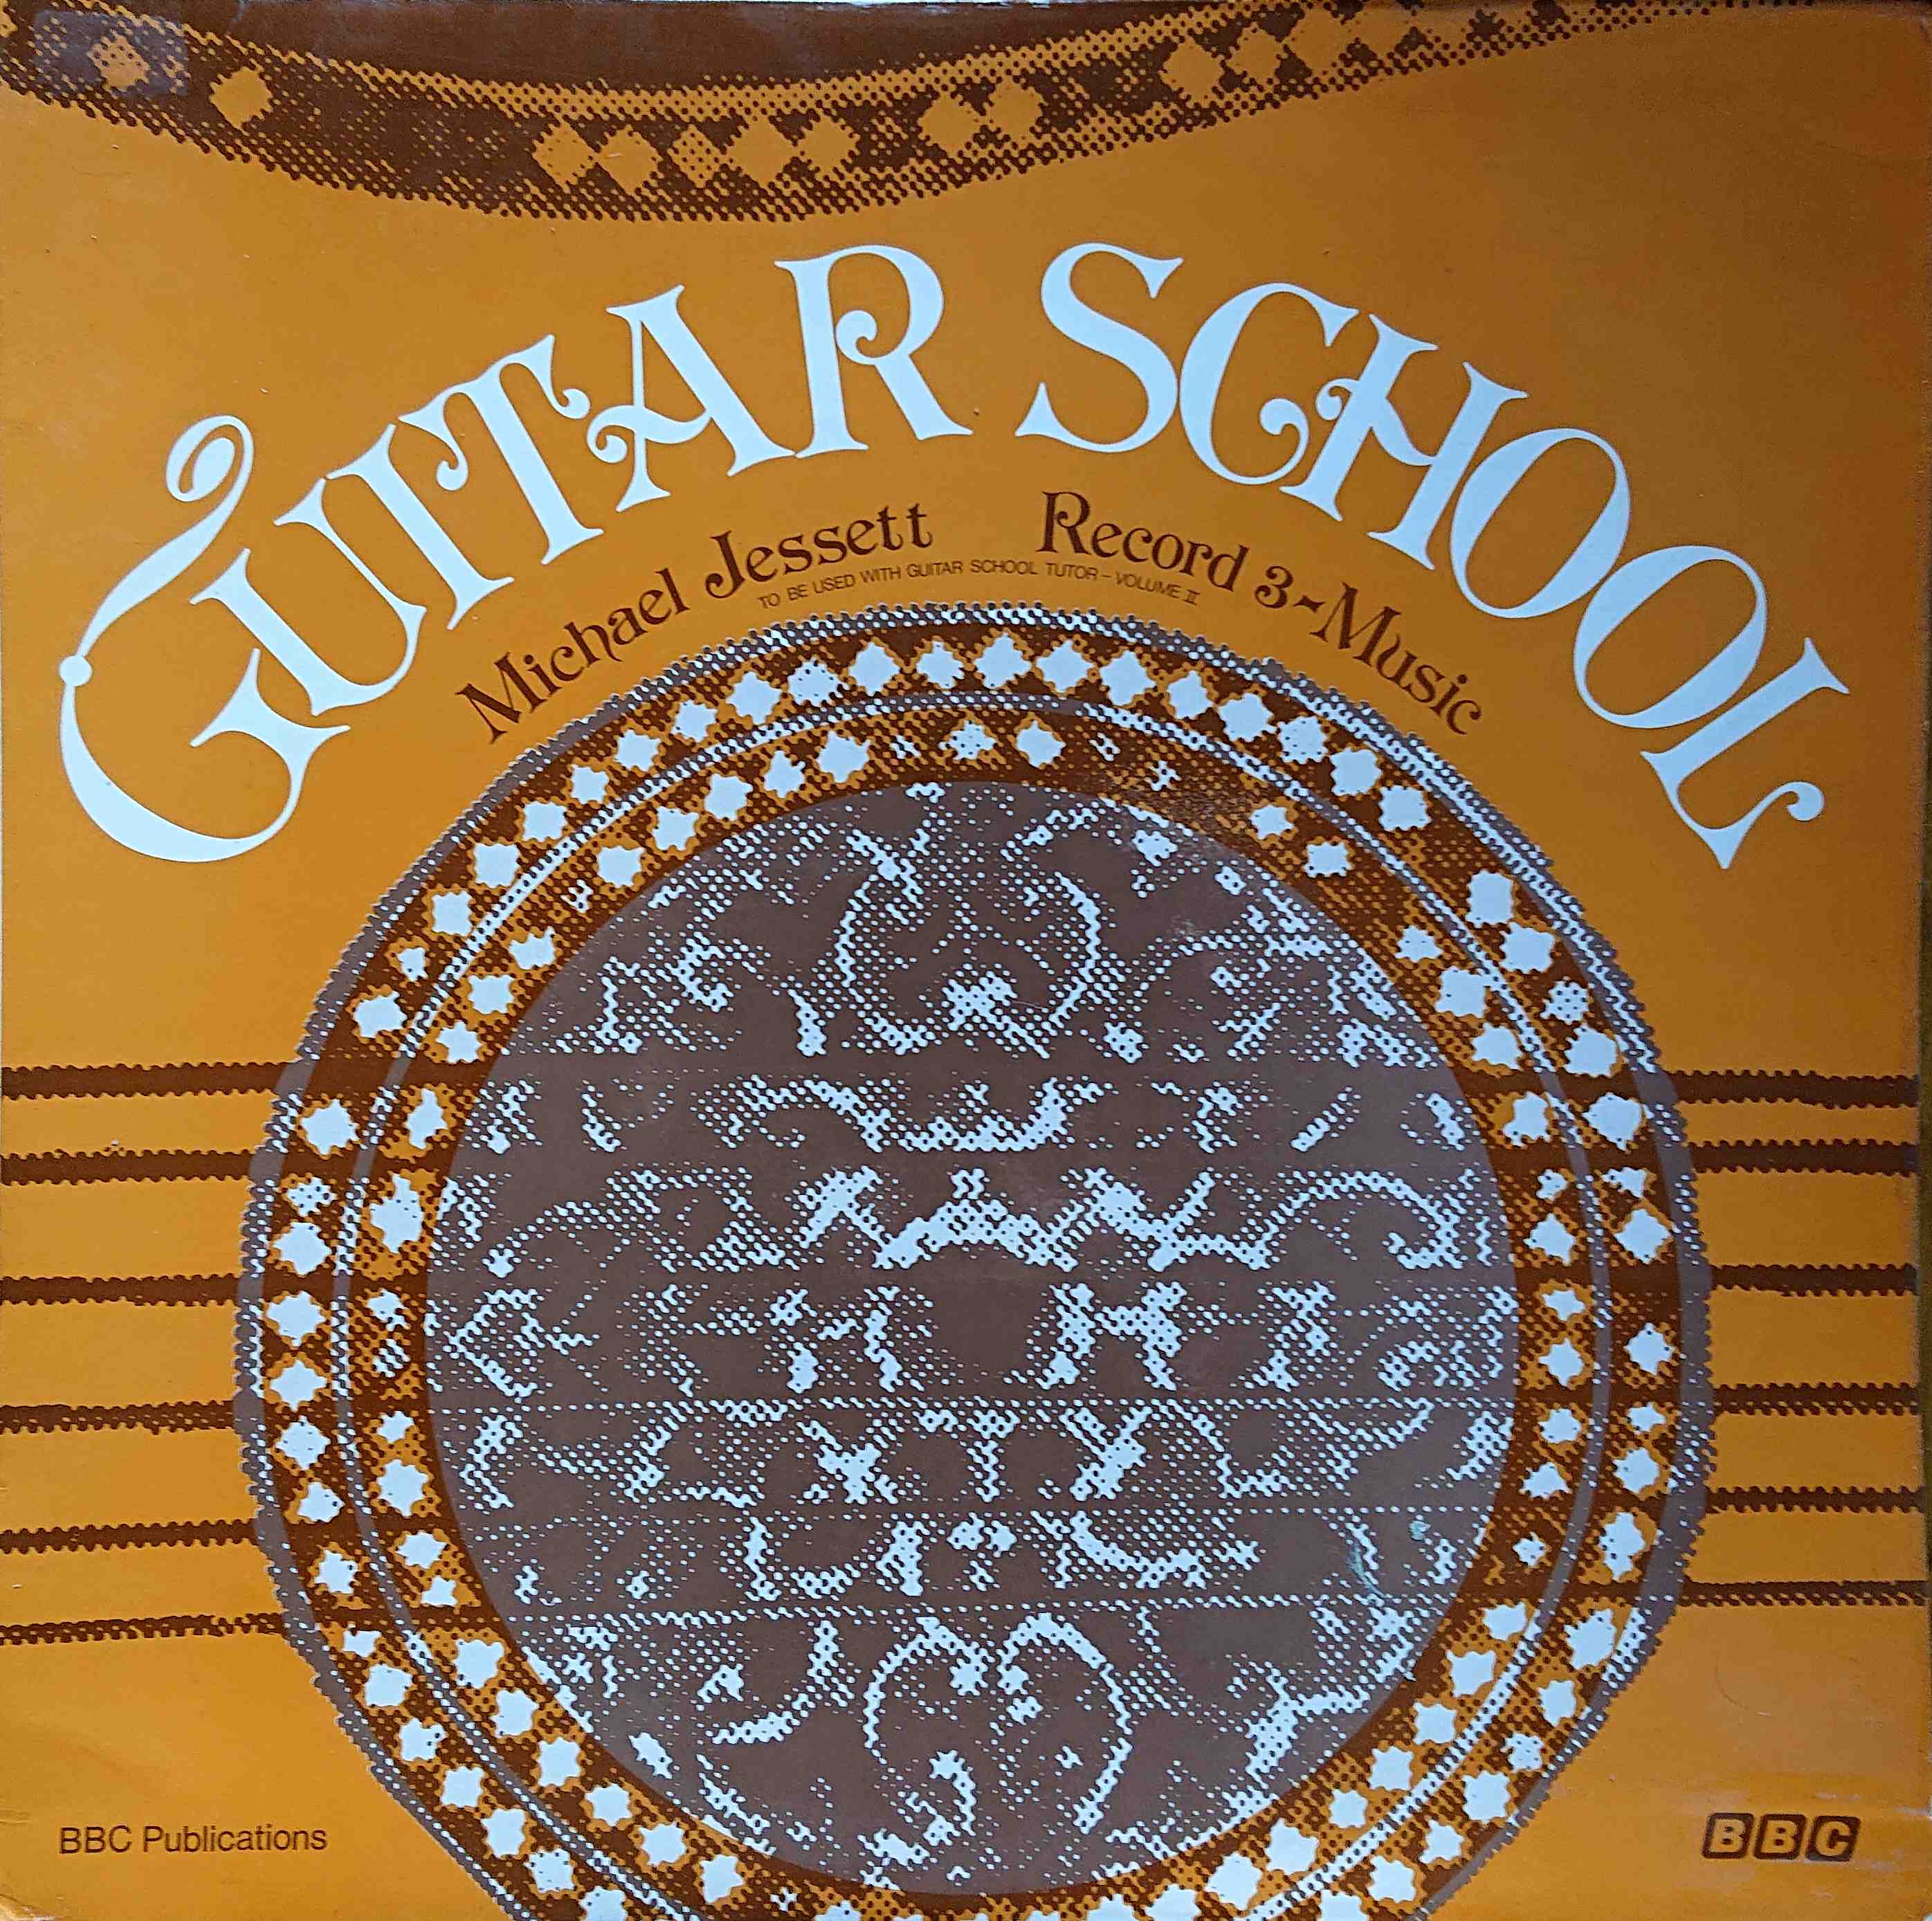 Picture of OP 205/206 Guitar school - Record 3 - Music by artist Michael Jessett from the BBC albums - Records and Tapes library